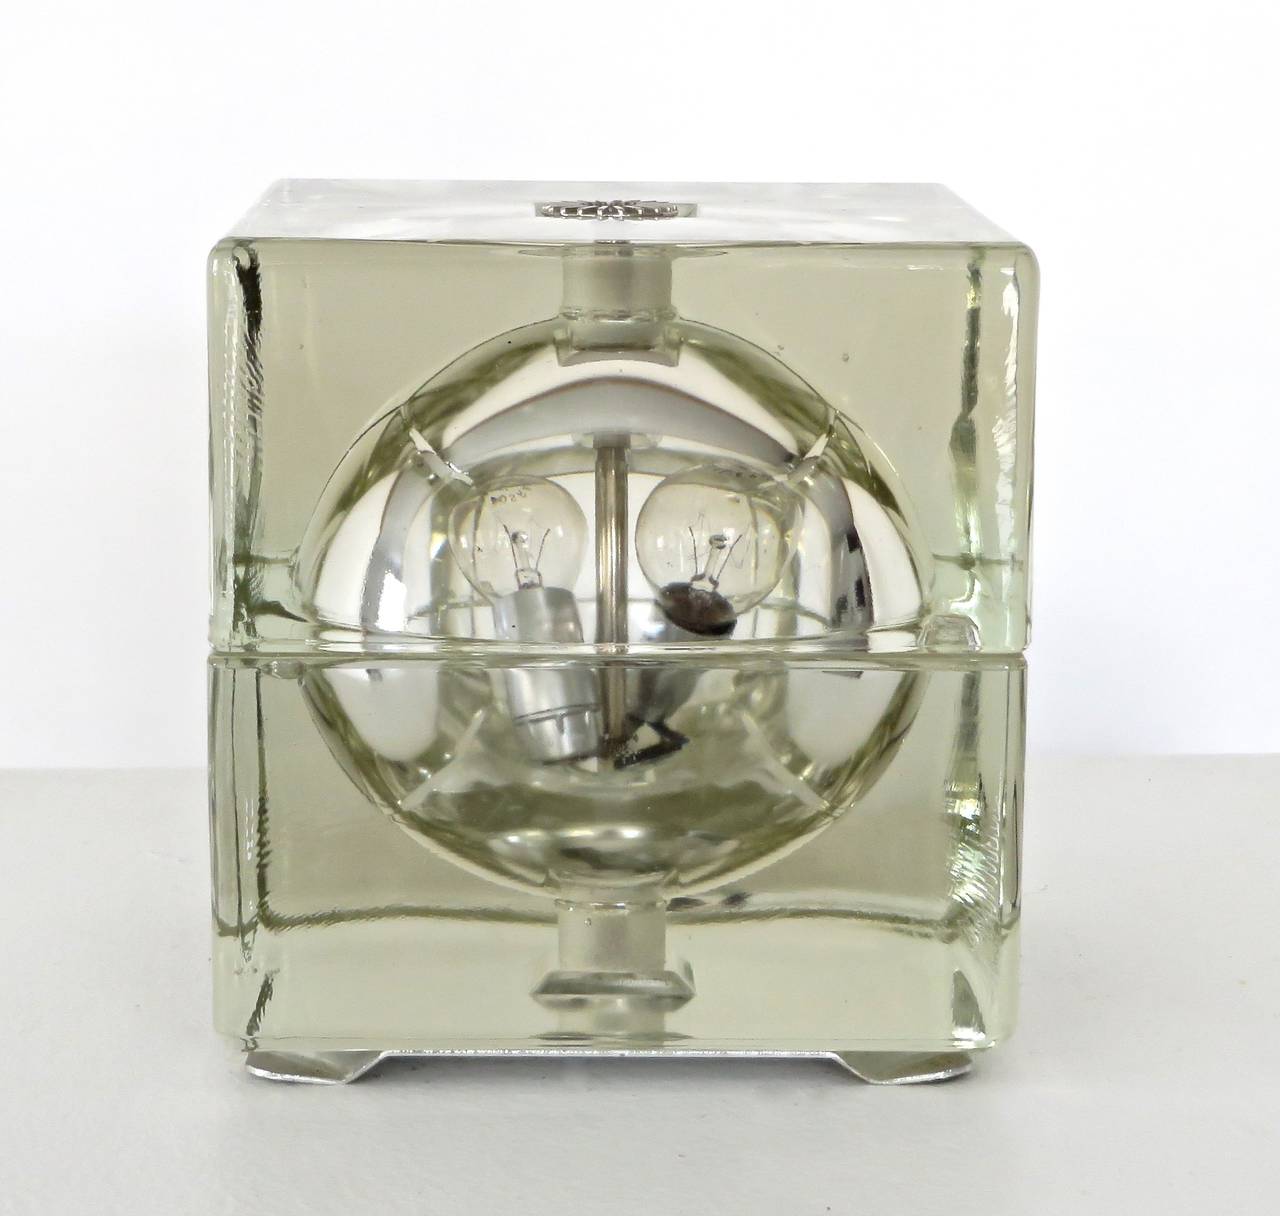 Cast glass Cubosfera lamp by Alessandro Mendini, two part cube with internal sphere by Fidenza Vetraria, Italy, 1968. Two light sources in the interior. Switch on the cord. 
Active since the 1960s has been not only a designer but an important